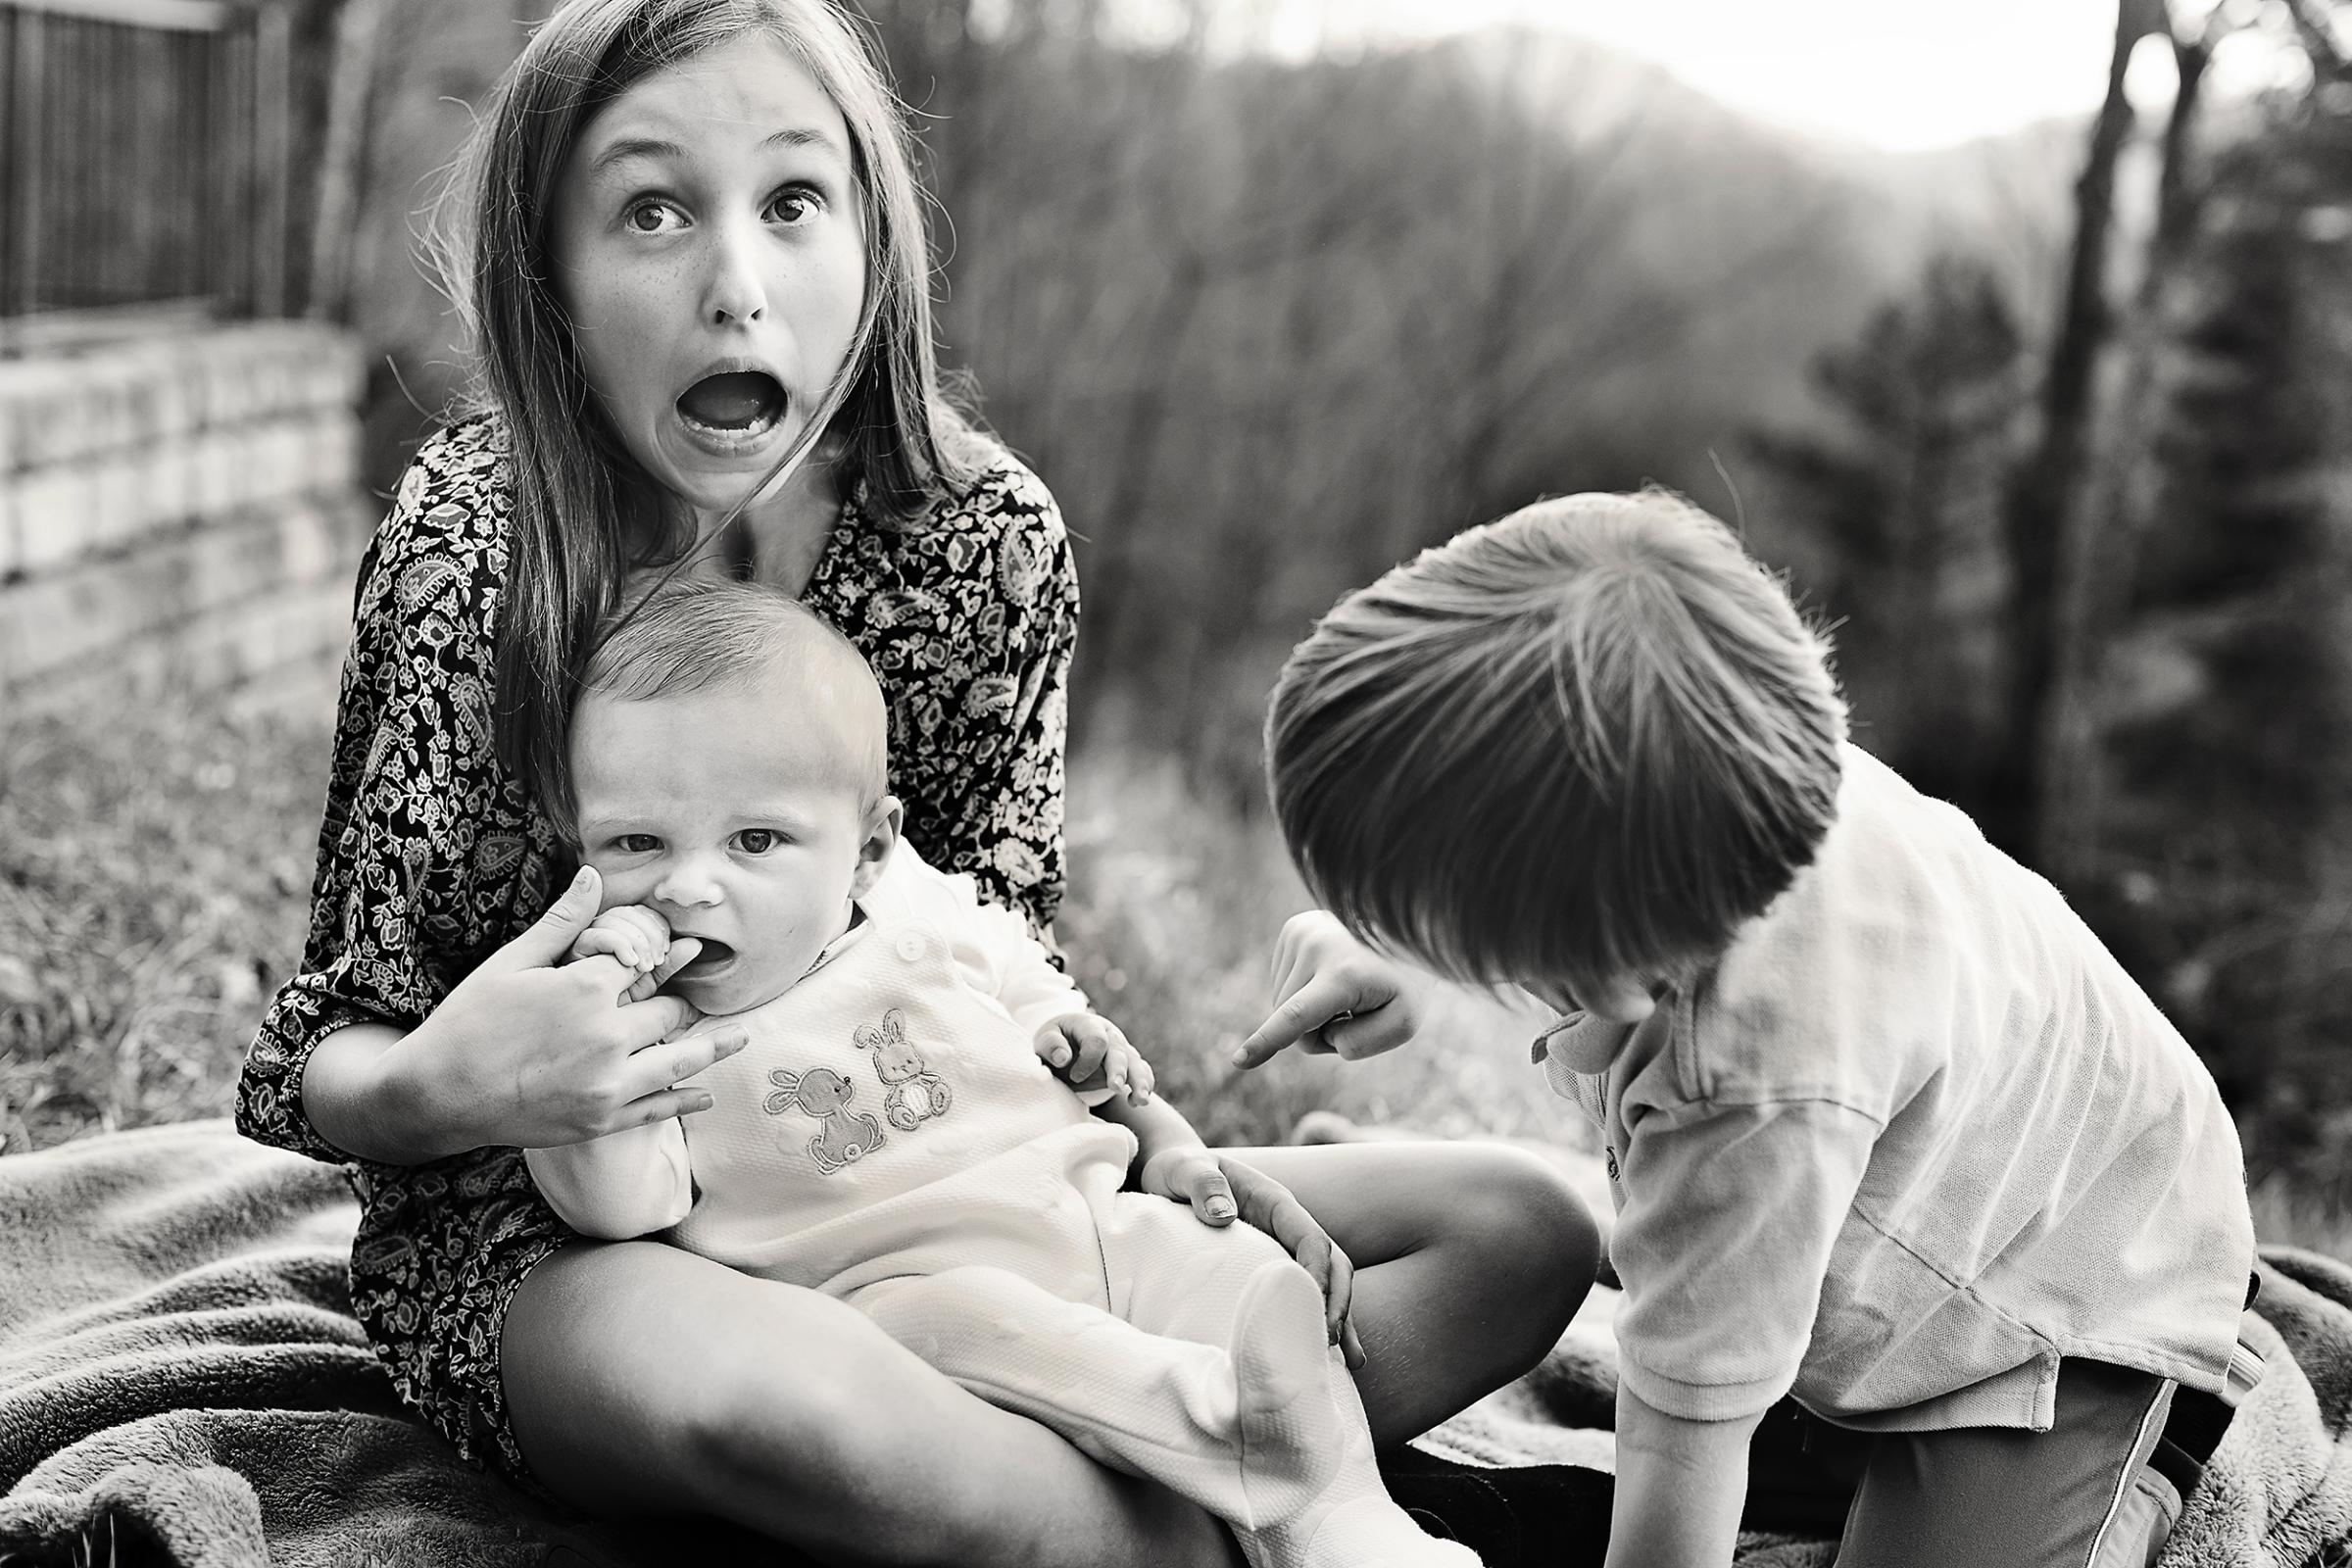 Growing Up - A young girl is surprised by her baby cousin who chomps...